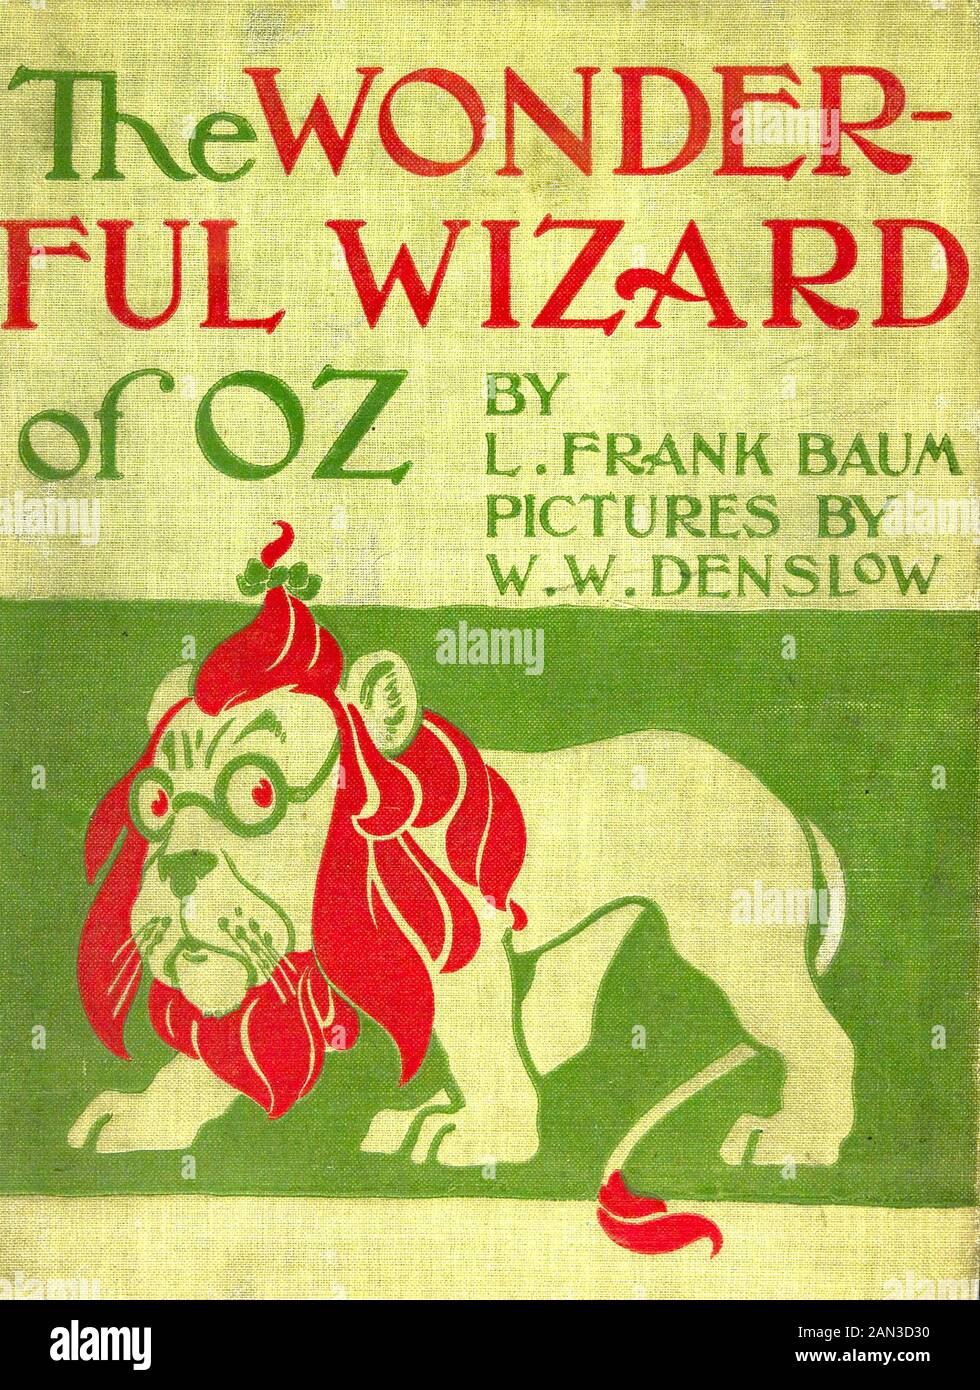 THE WONDERFUL WIZARD OF OZ Cover of the 1900 first edition of the novel by L. Frank Baum. The back cover showed the other main characters Stock Photo